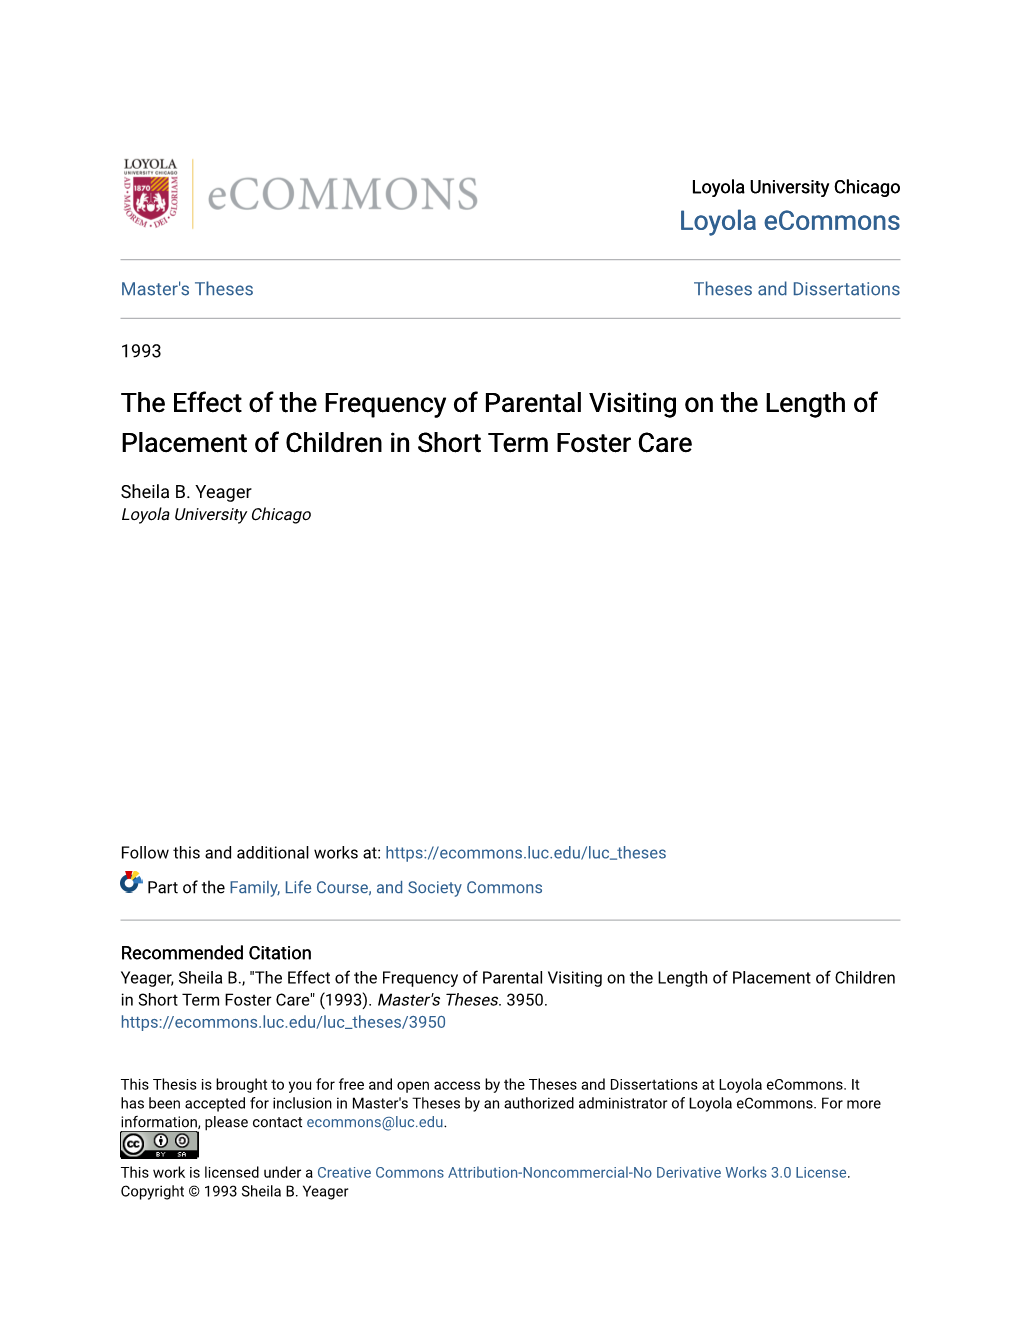 The Effect of the Frequency of Parental Visiting on the Length of Placement of Children in Short Term Foster Care